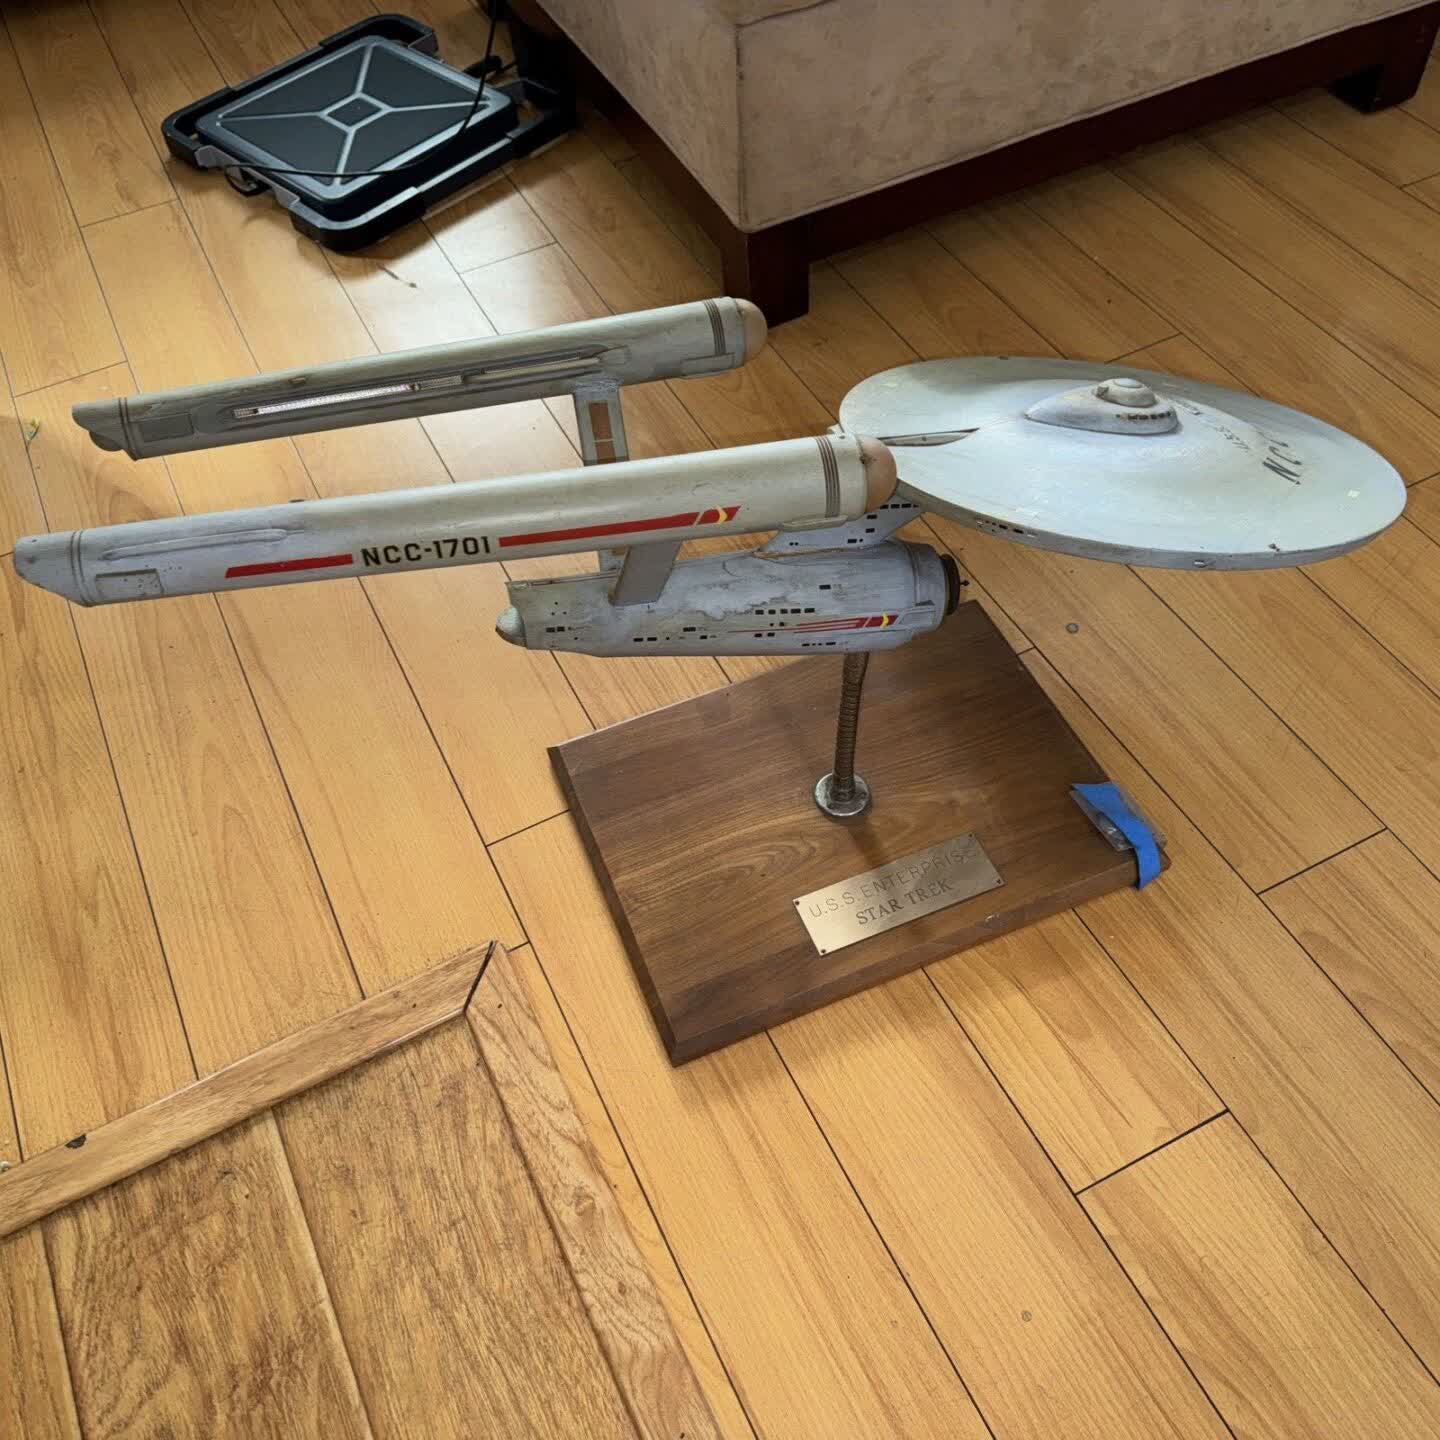 Missing for 50 years, the original Star Trek Enterprise model may have appeared on eBay